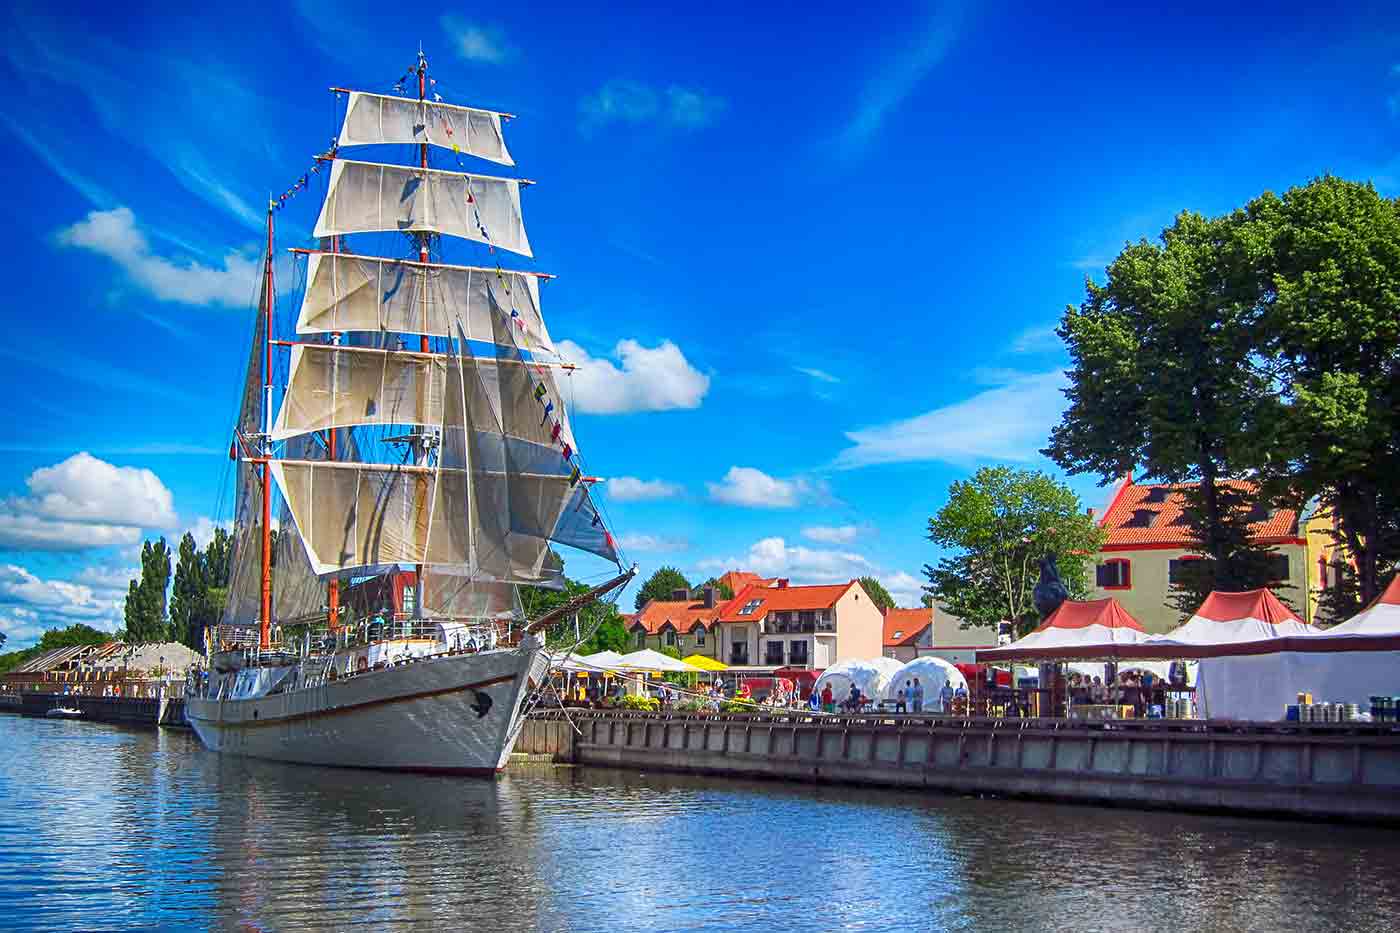 Klaipeda Tourist Attractions - Best Thing to Do and See in Klaipeda